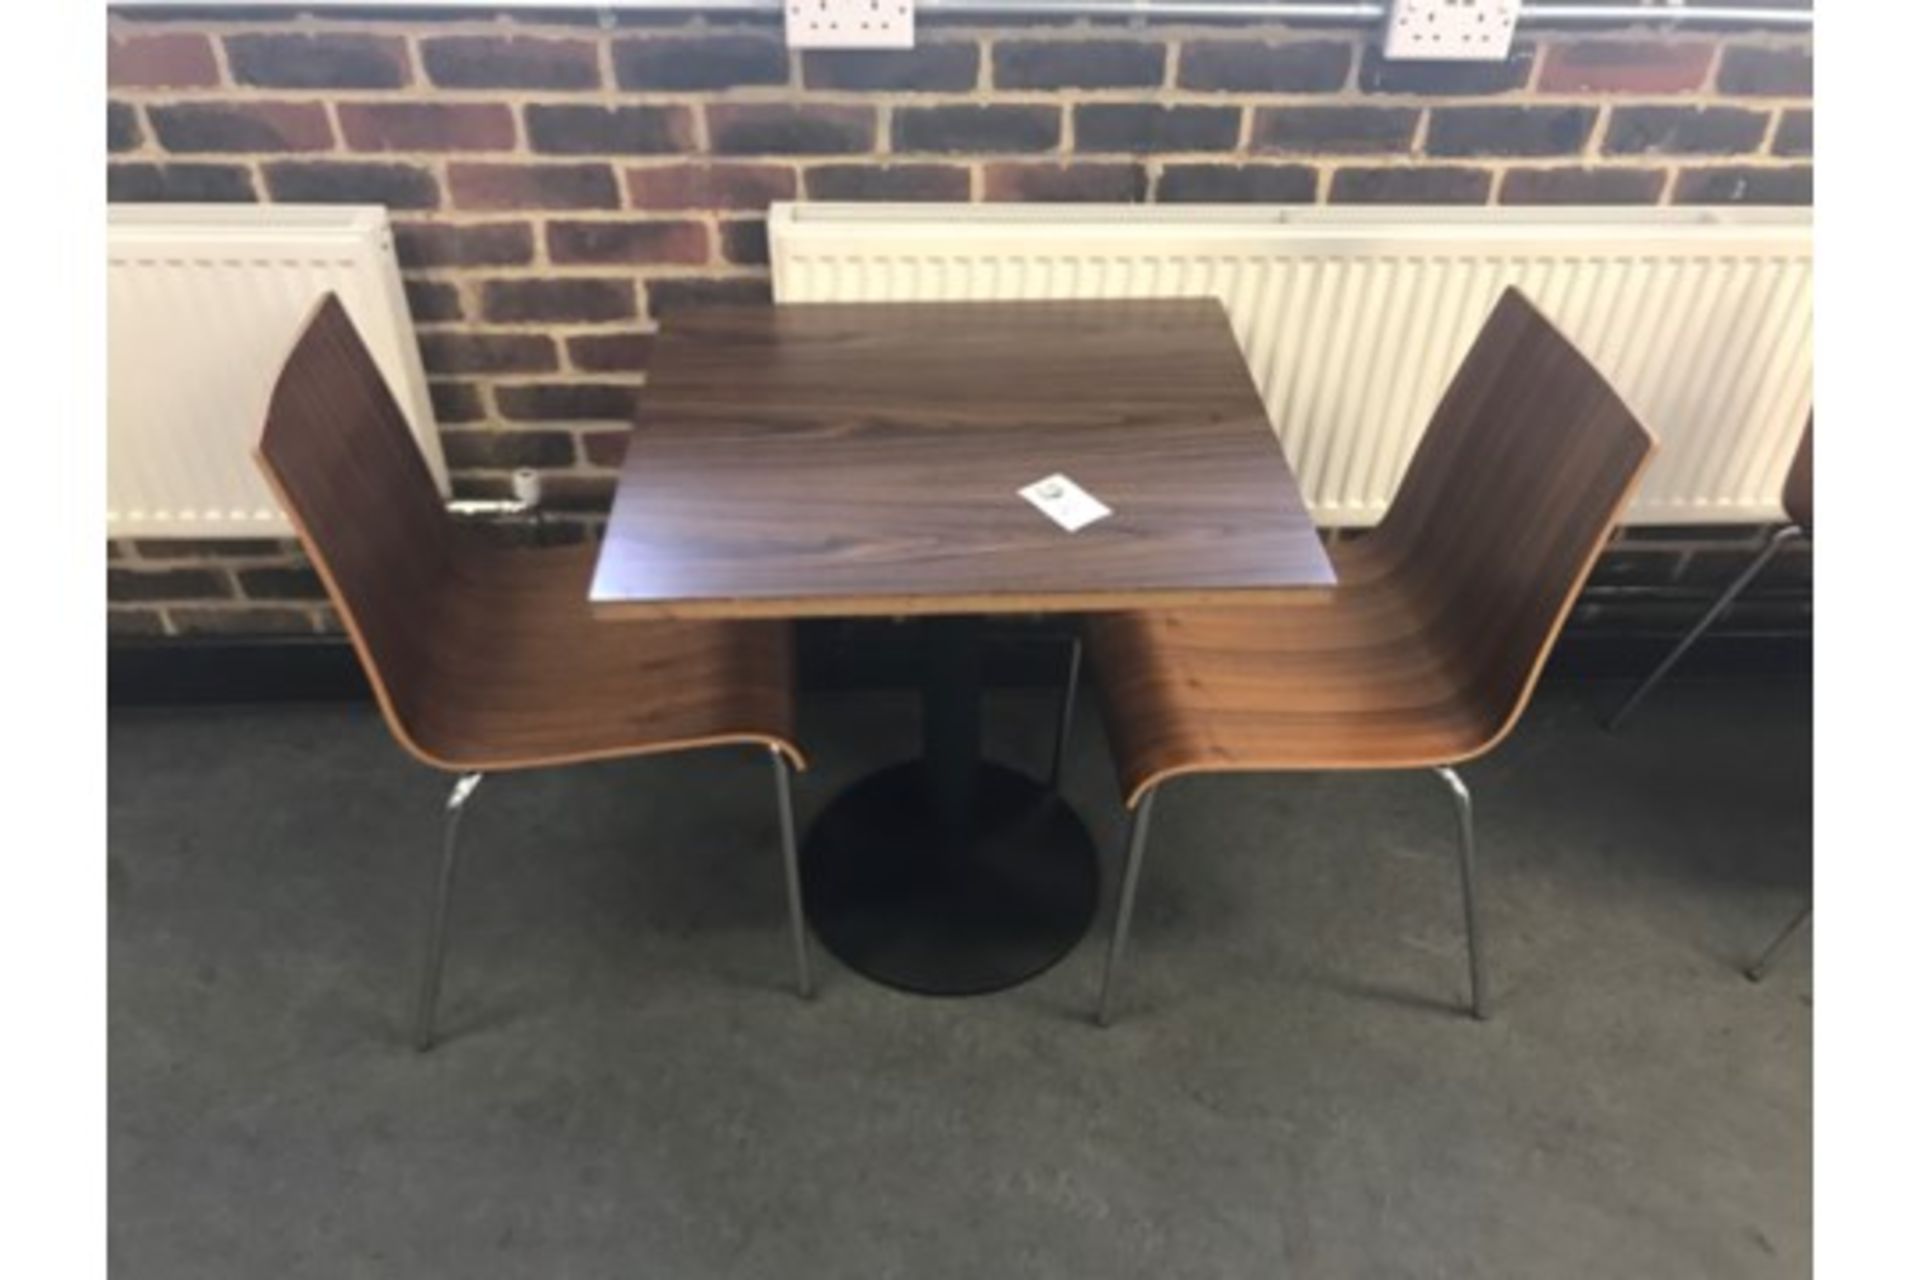 Cafe Table With 2 Chairs